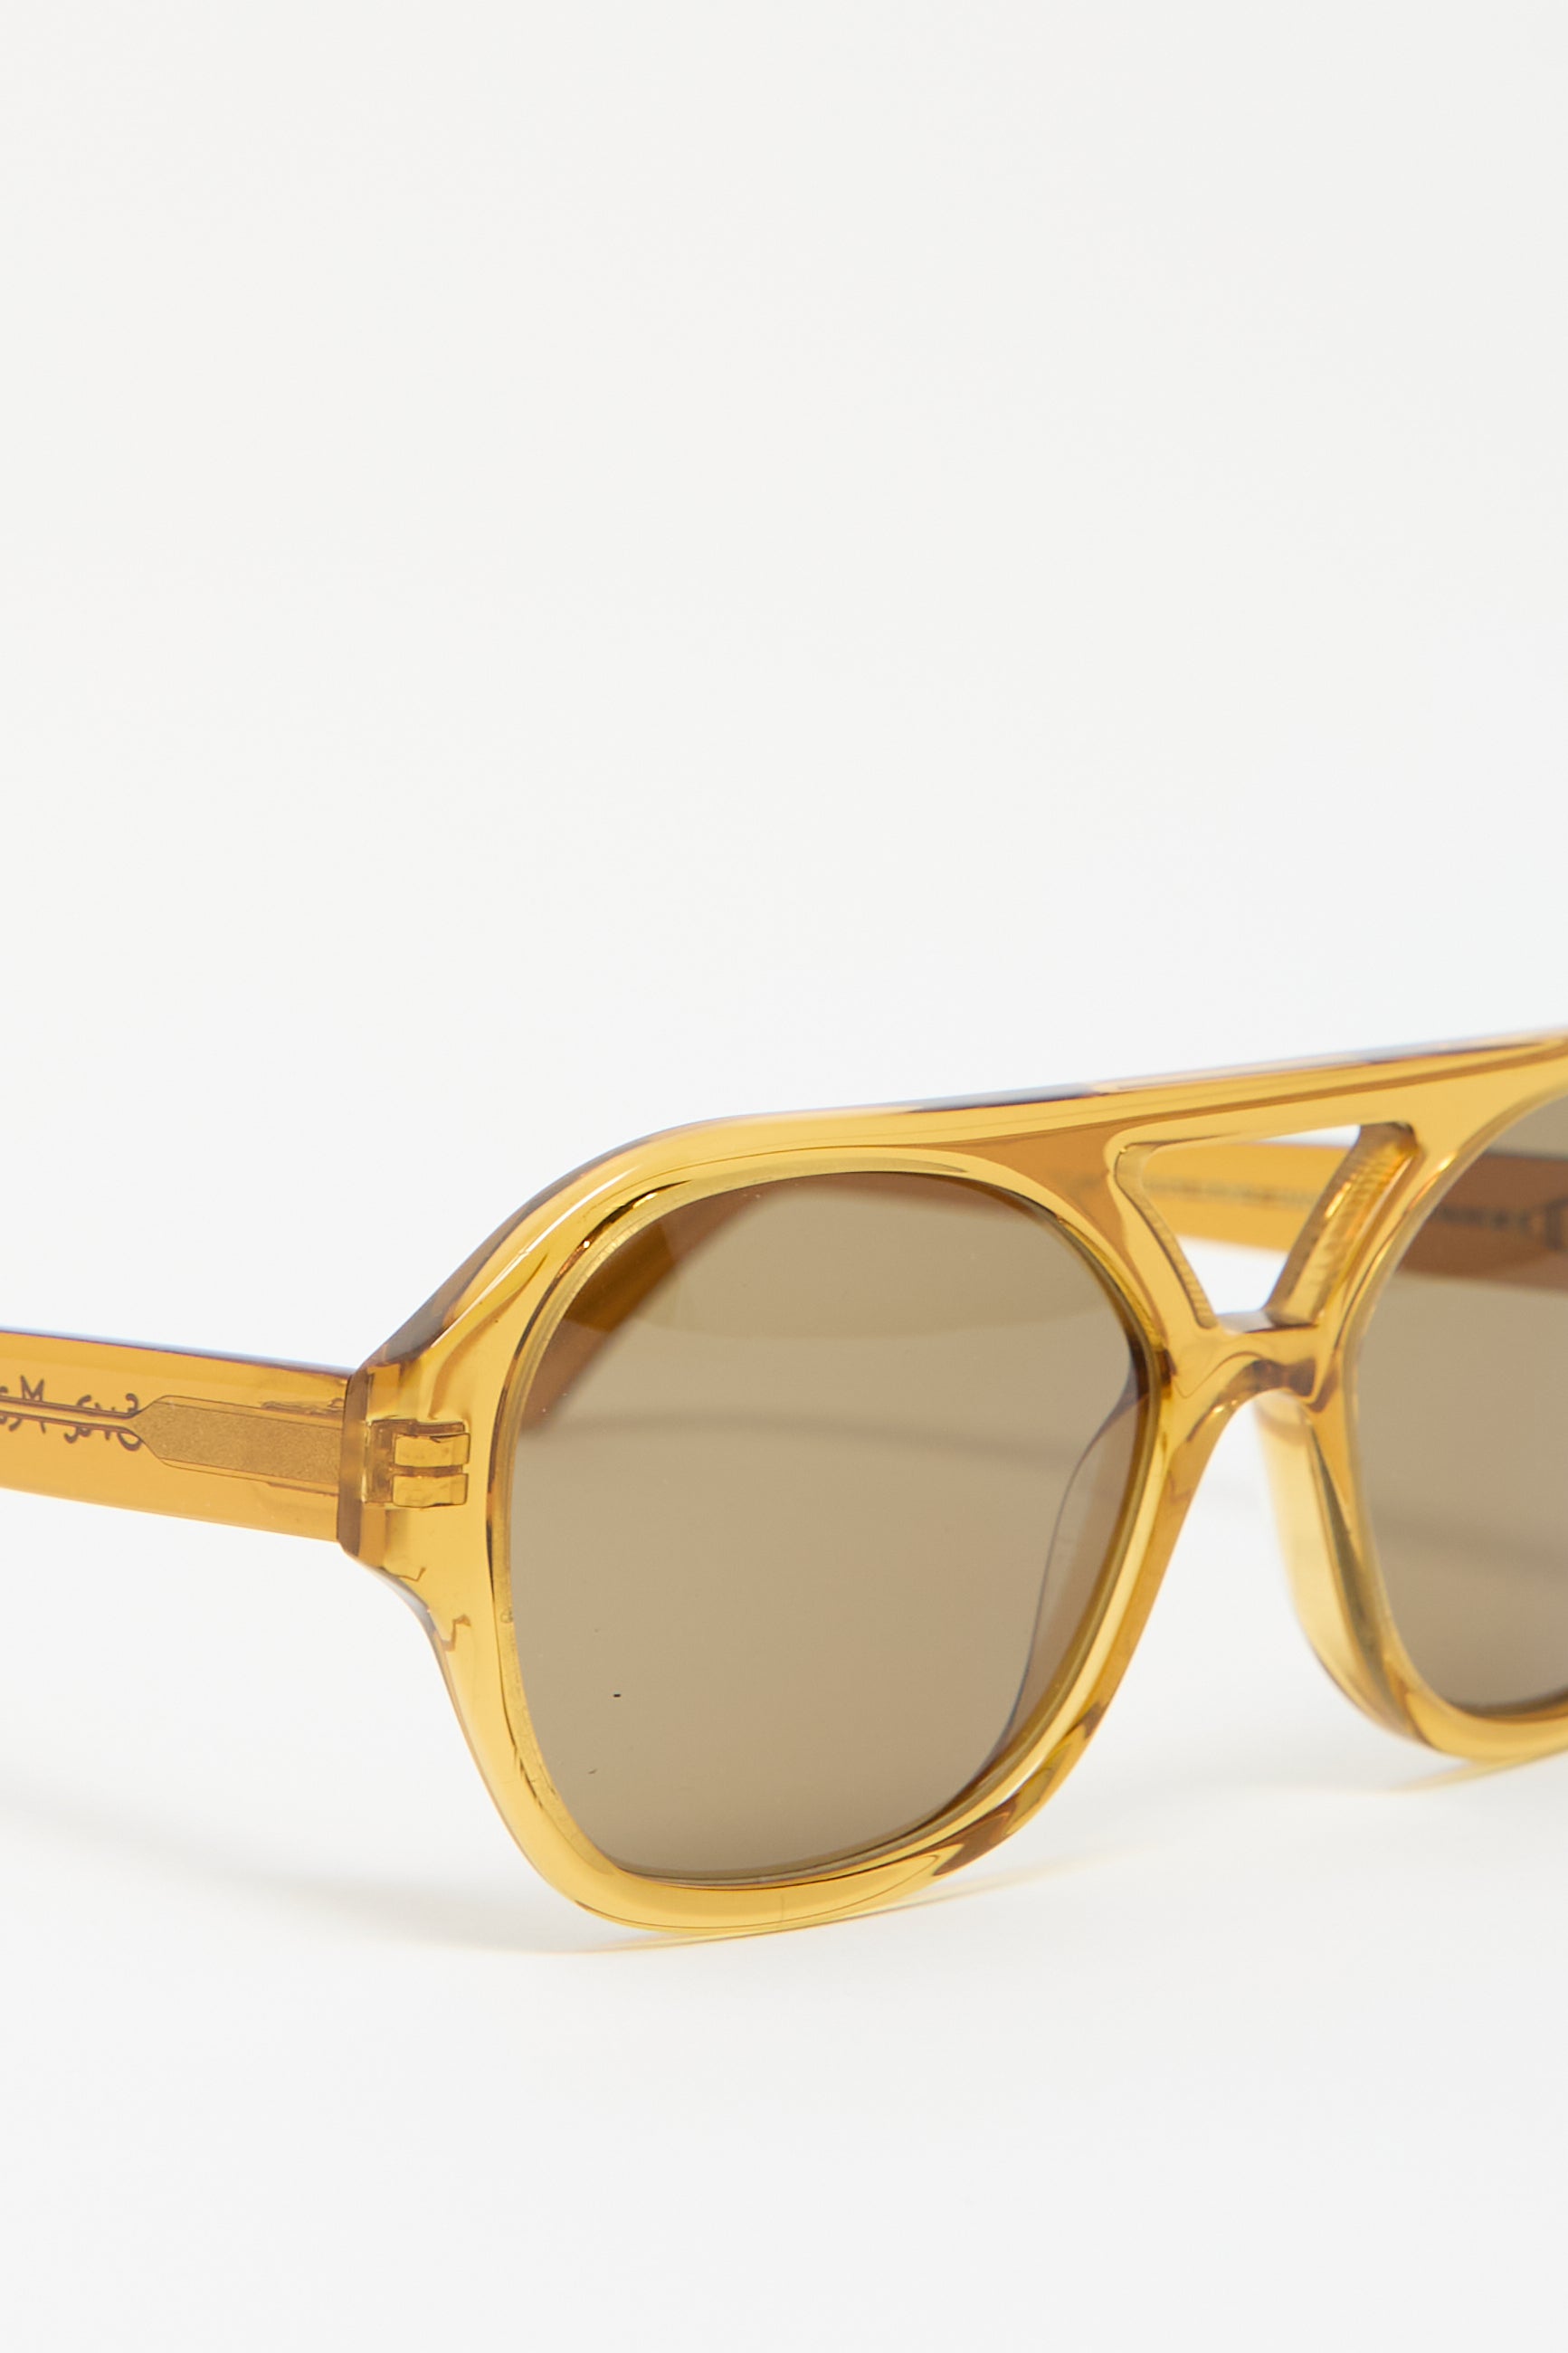 Eva Masaki's Chiyo Aviator Sunglasses in Honey, a pair of amber-colored, plastic-frame sunglasses with UV protection and brown-tinted lenses on a white background.